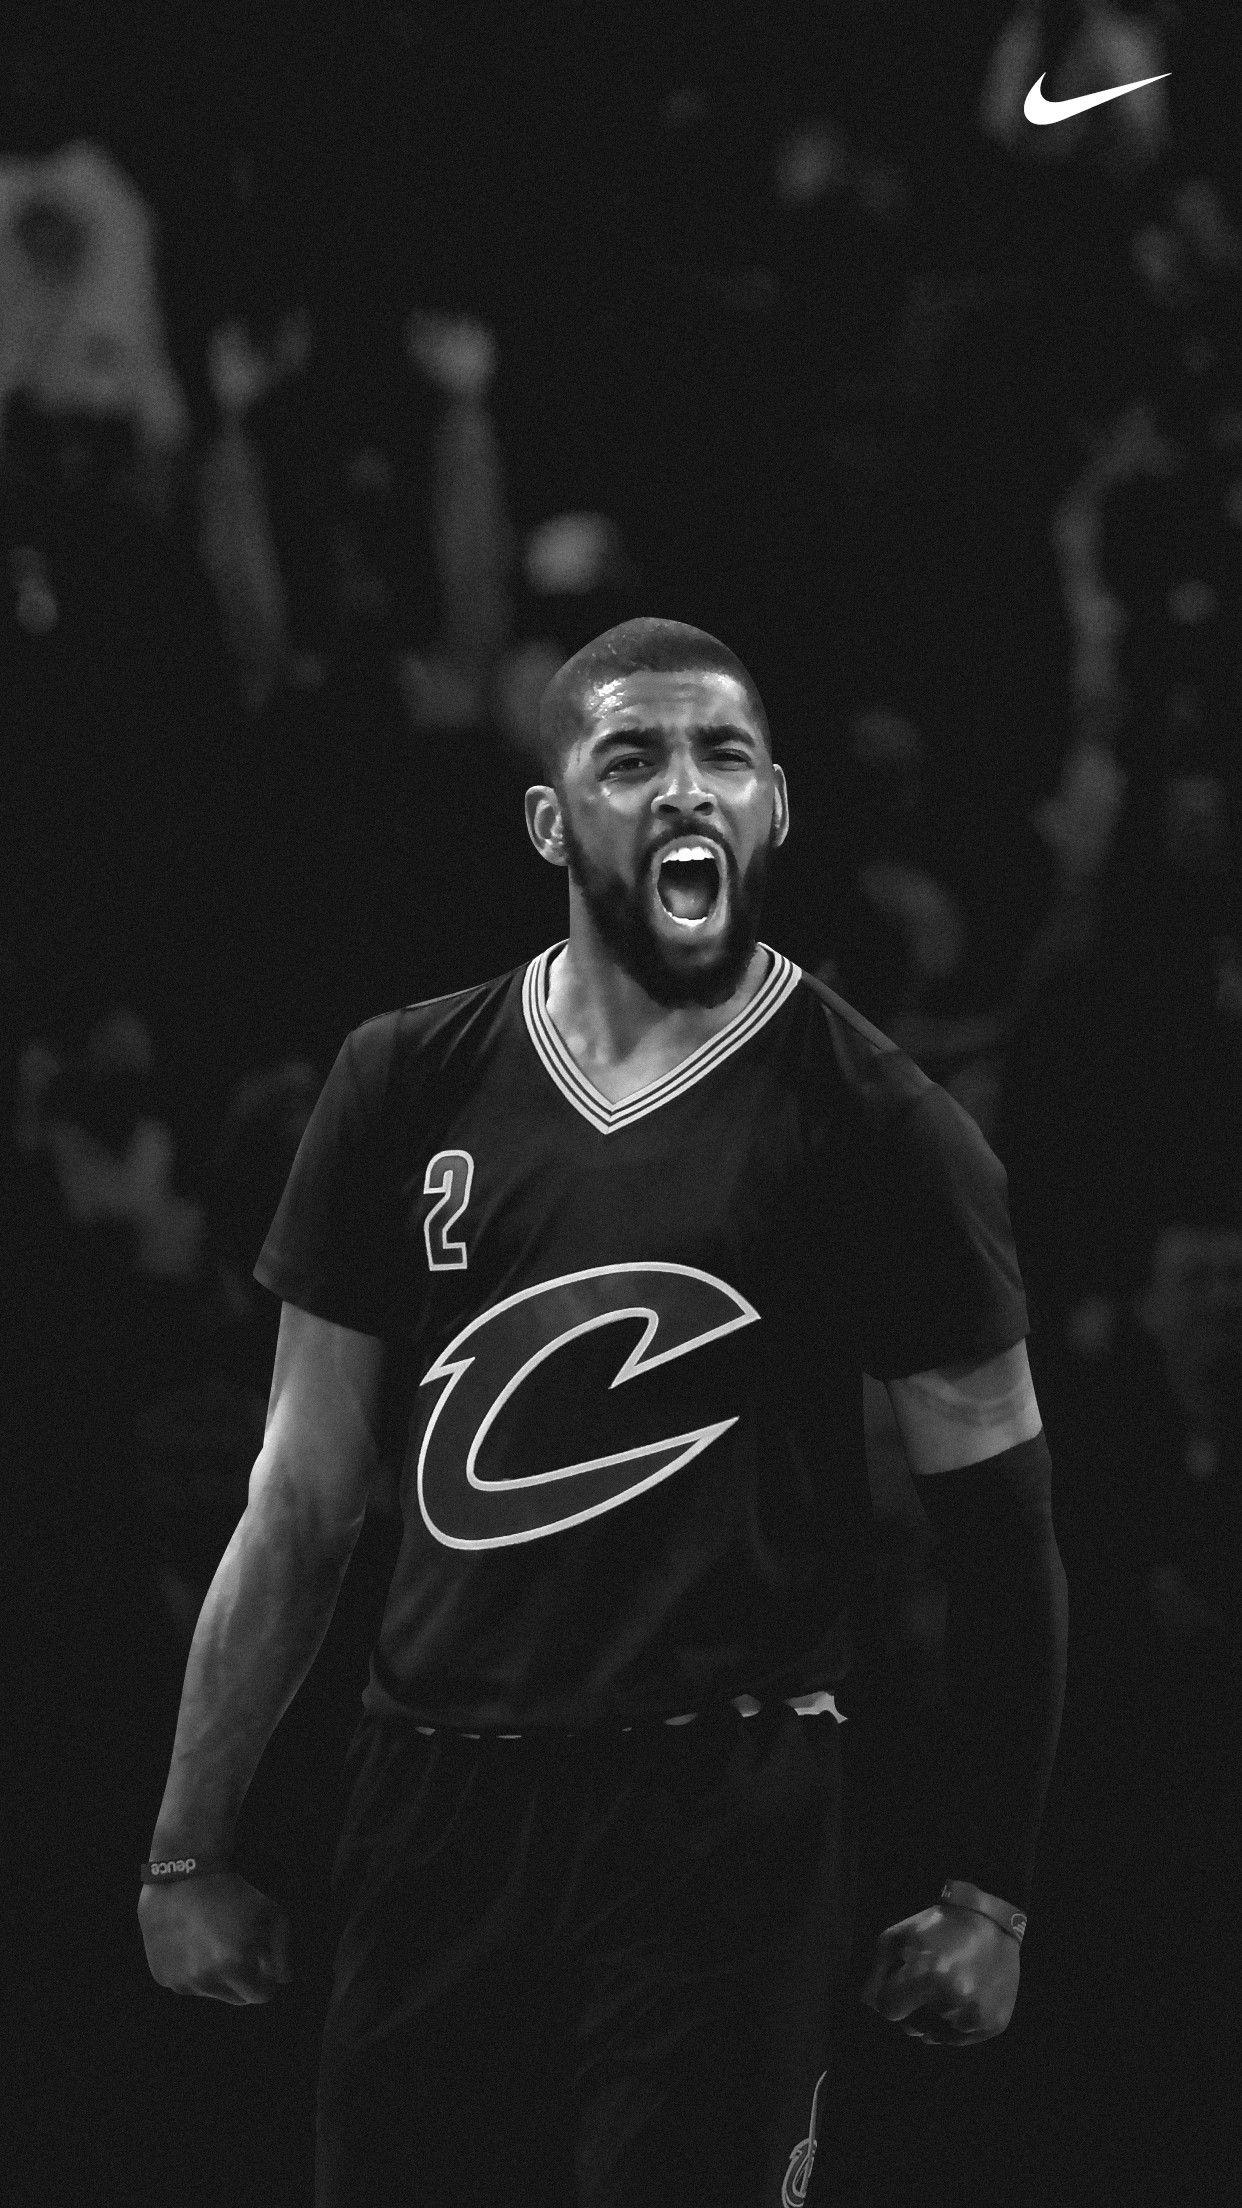 kyrie irving black and white wallpaper, cheap kyrie irving black